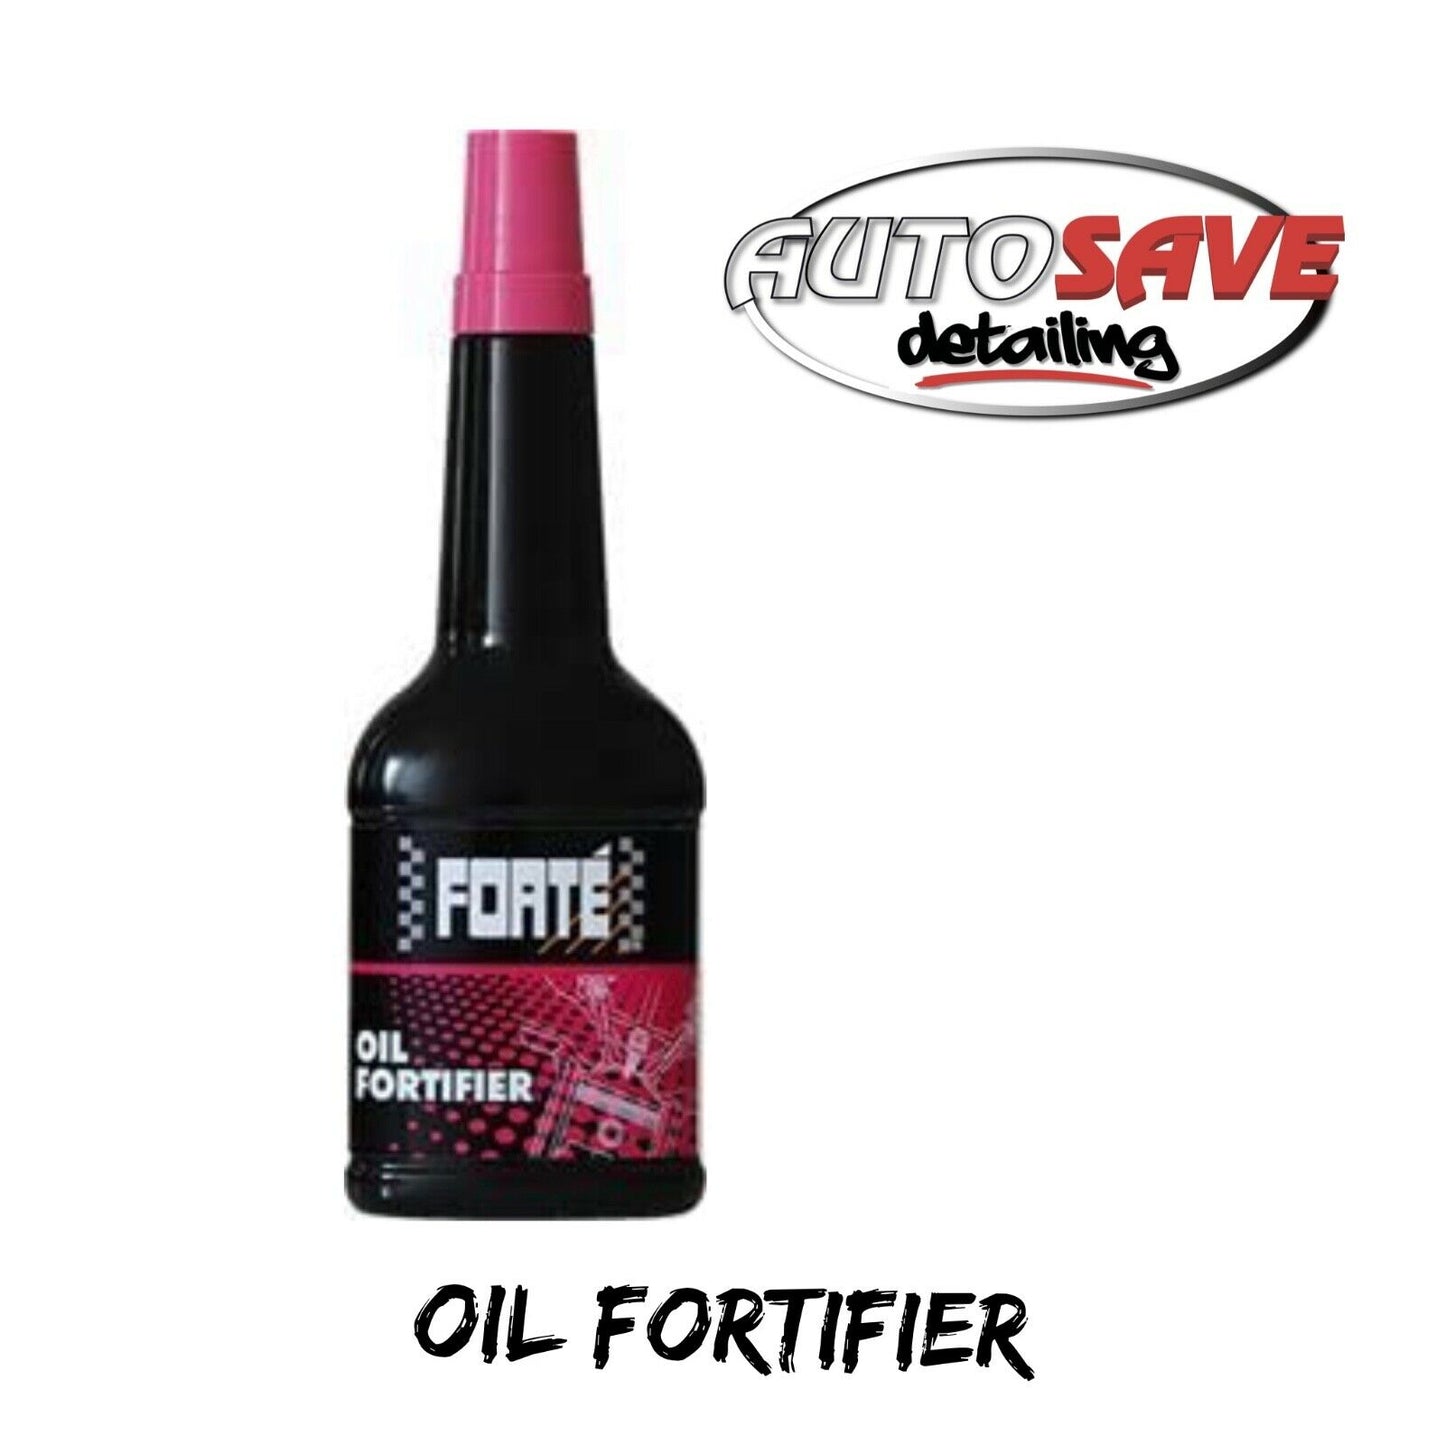 FORTE Oil Fortifier (400ml) - Reduces Oil Consumption